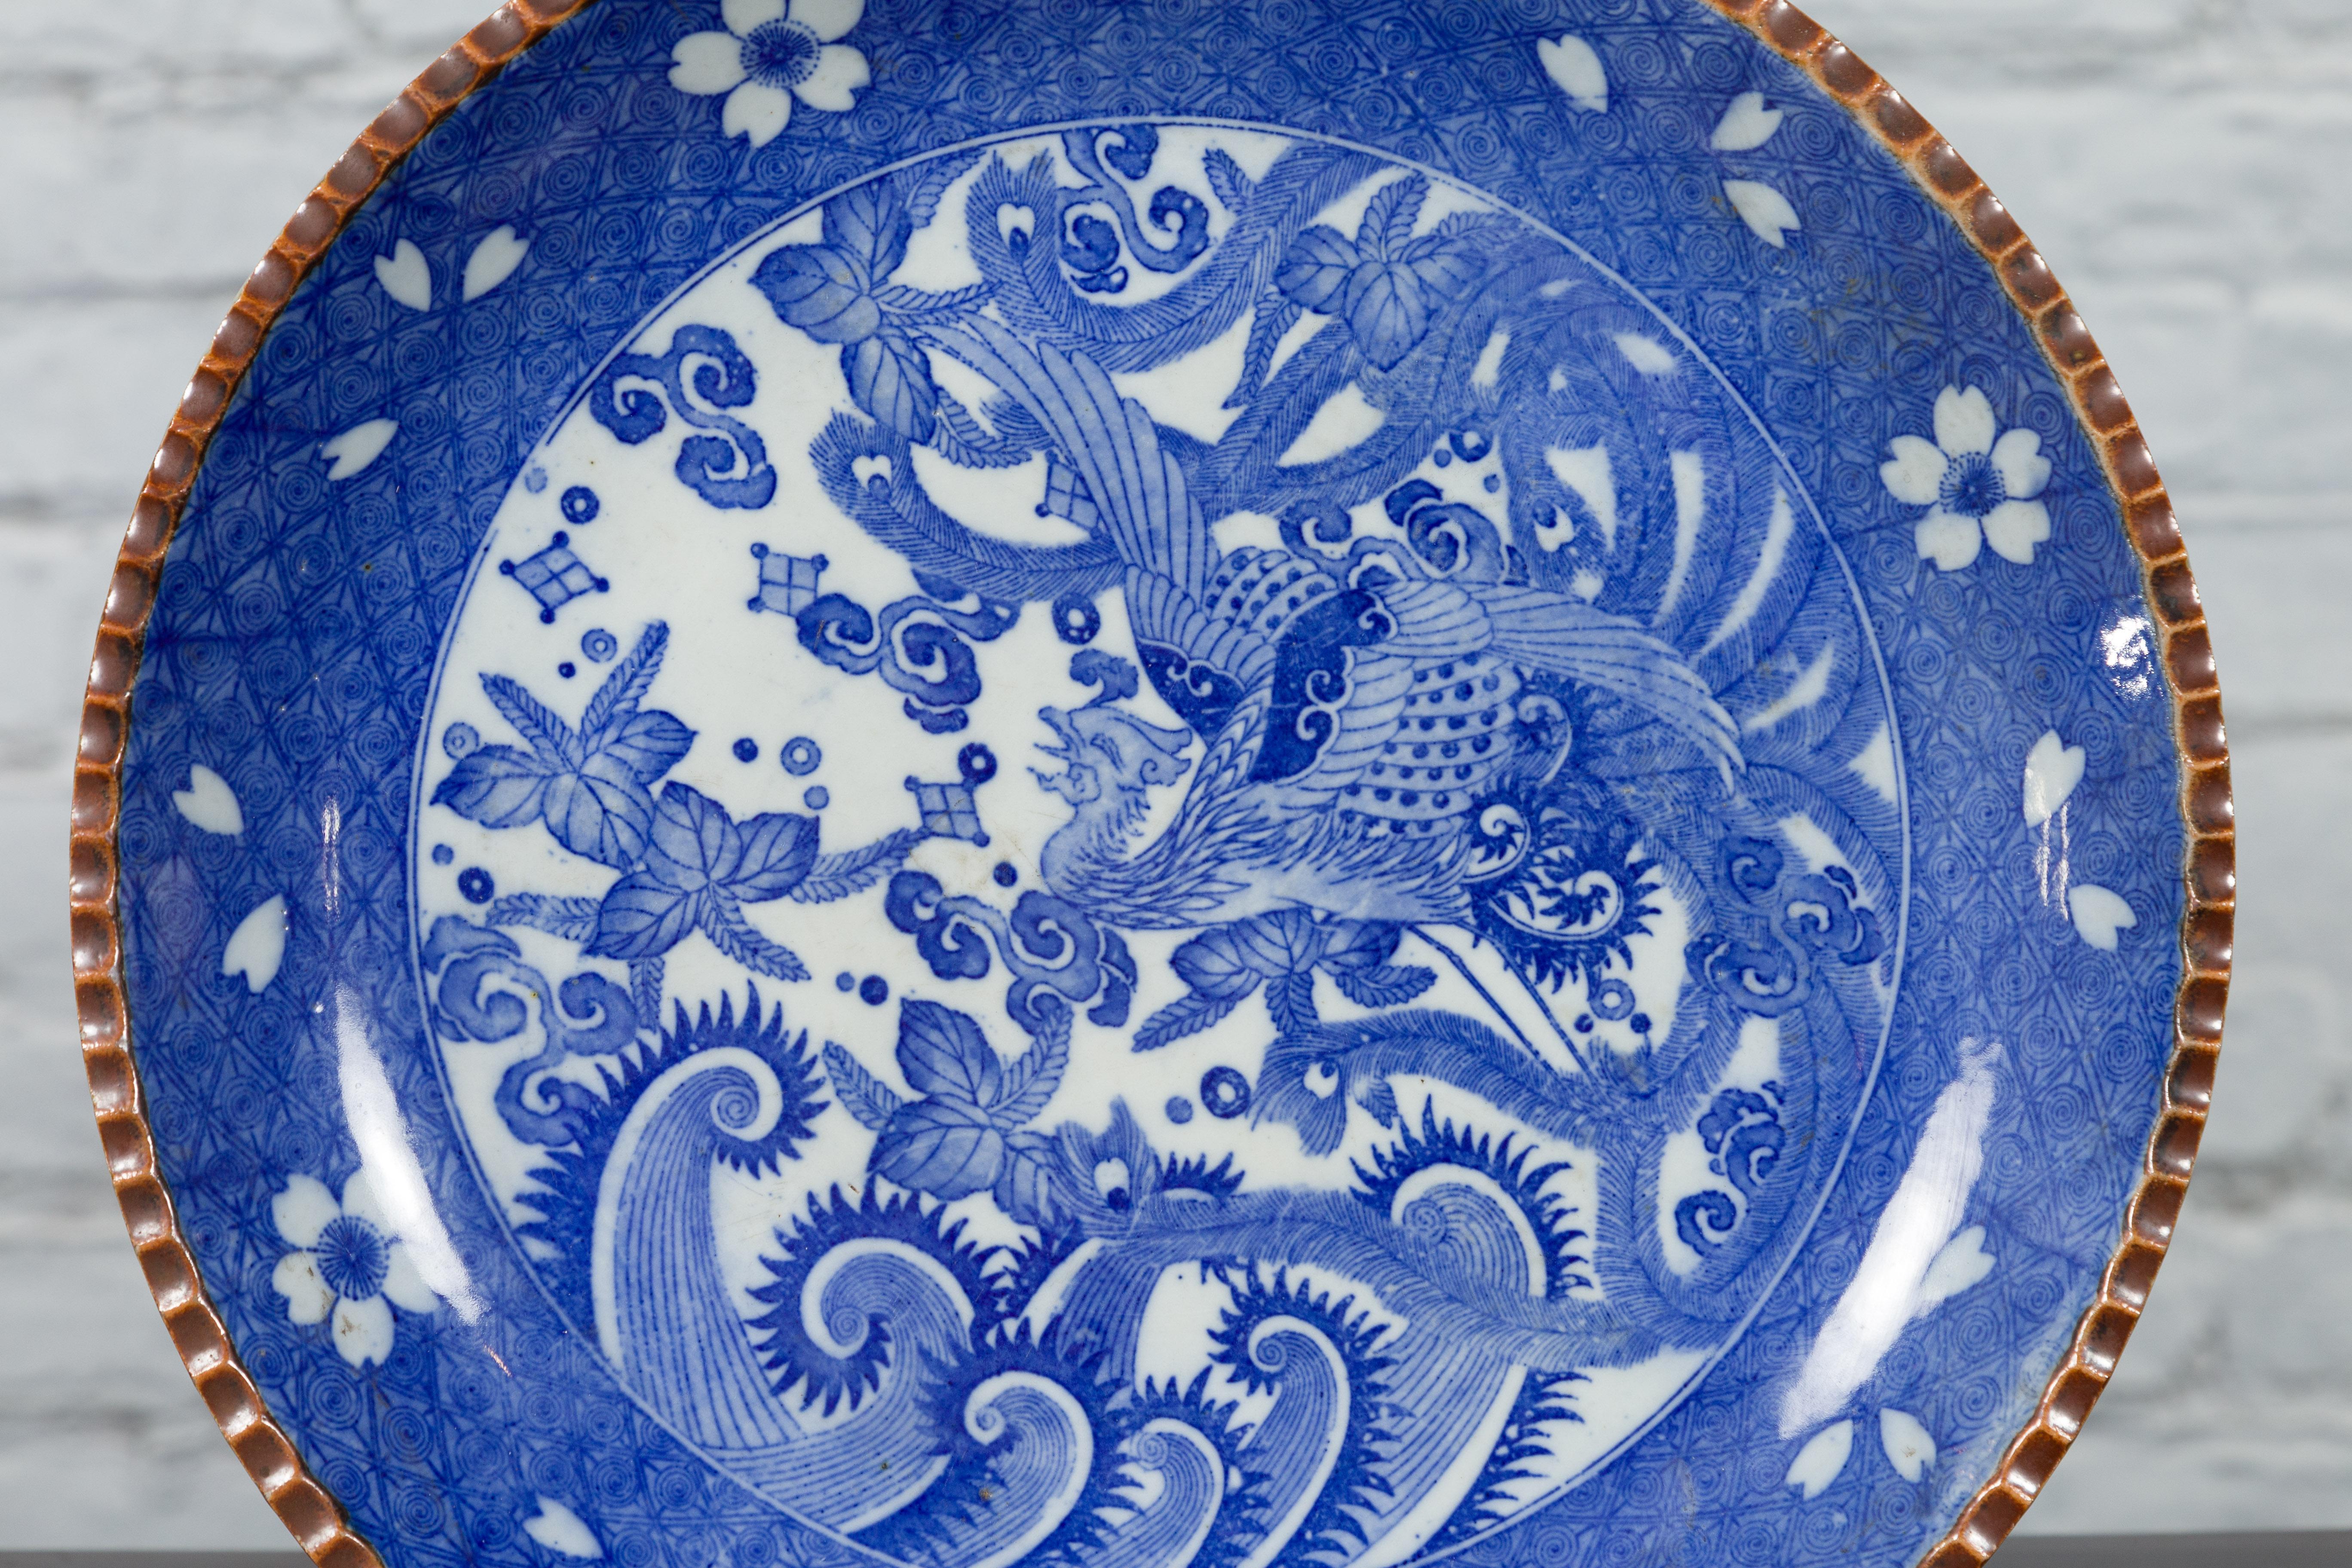 Meiji Period Japanese Igezara Transferware Plate with Phoenix and Foliage Motifs In Good Condition For Sale In Yonkers, NY